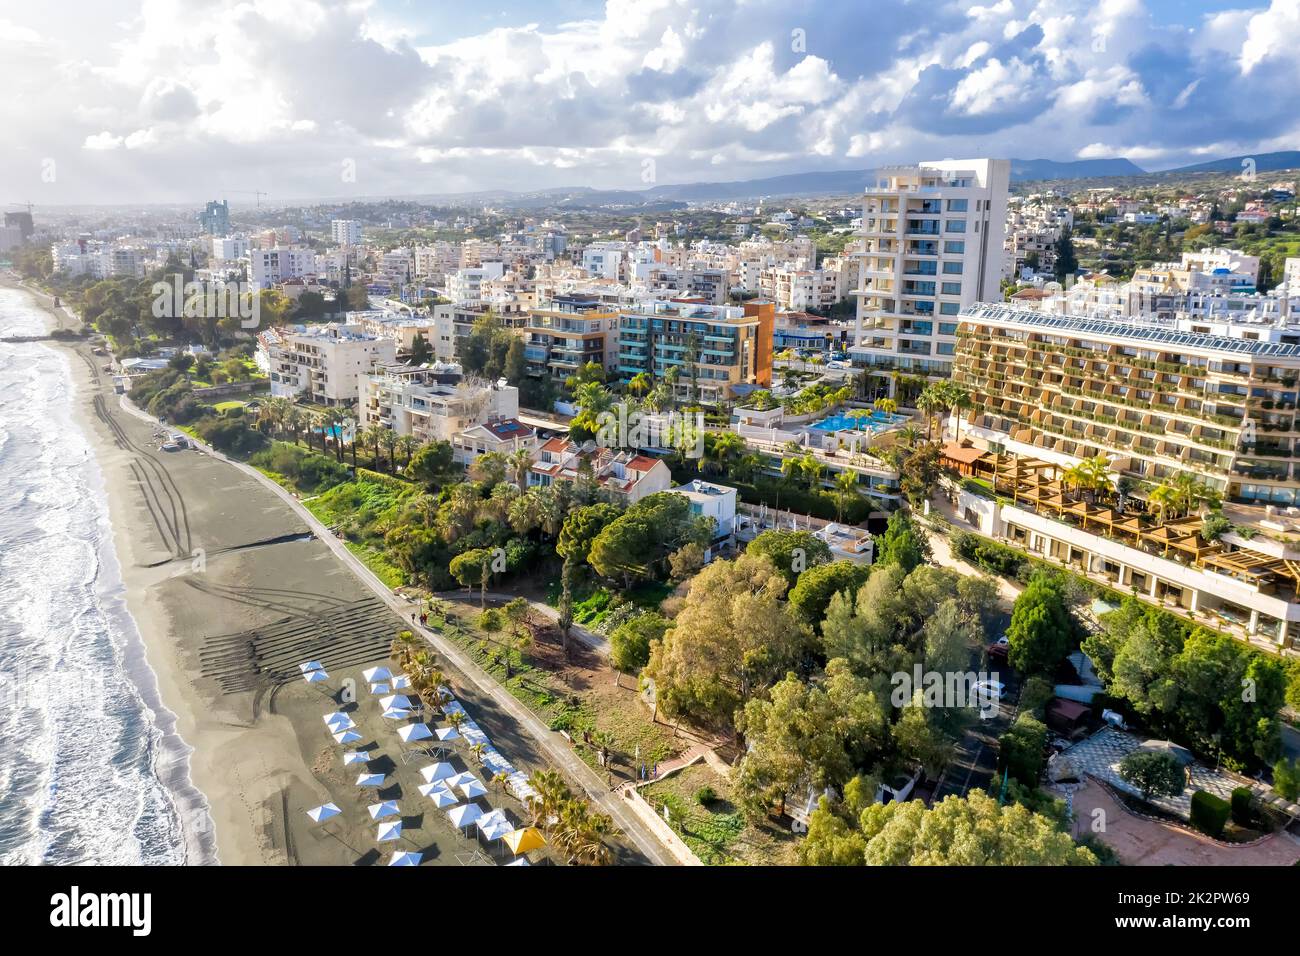 Aerial view of Limassol city, a famous tourist resort, Cyprus Stock Photo